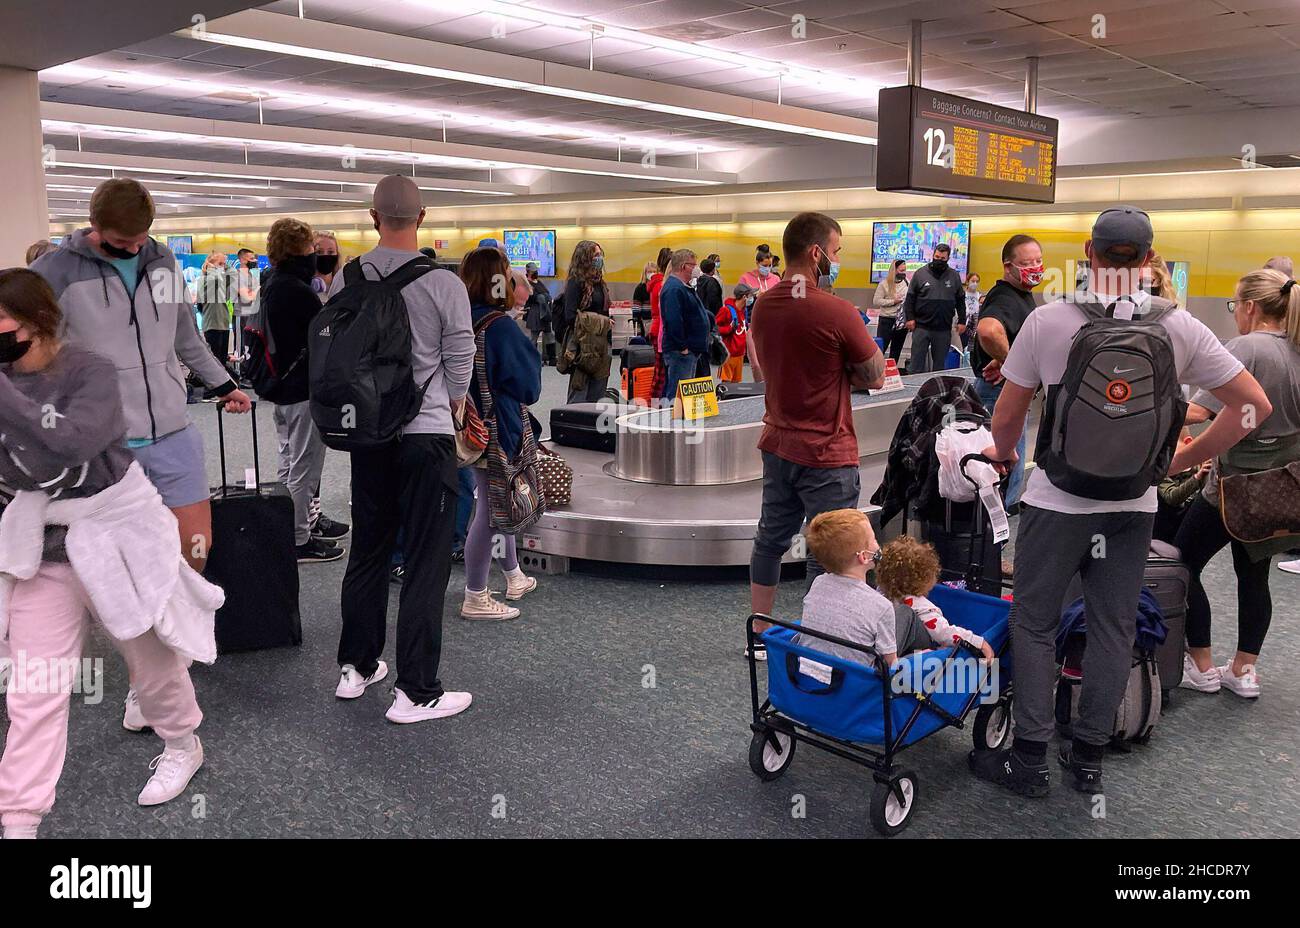 Travelers are seen waiting for their luggage at a baggage carousel at Orlando International Airport two days after Christmas. Due to flight crew shortages as a result of the COIVD-19 Omicron variant and due to other reasons, 760 flights to, from or within the US were canceled, and another 930 were delayed on December 27, 2021. Due to flight crew shortages as a result of the COIVD-19 Omicron variant and due to other reasons, 760 flights to, from or within the US were canceled and another 930 were delayed on December 27, 2021. (Photo by Paul Hennessy/SOPA Images/Sipa USA) Stock Photo